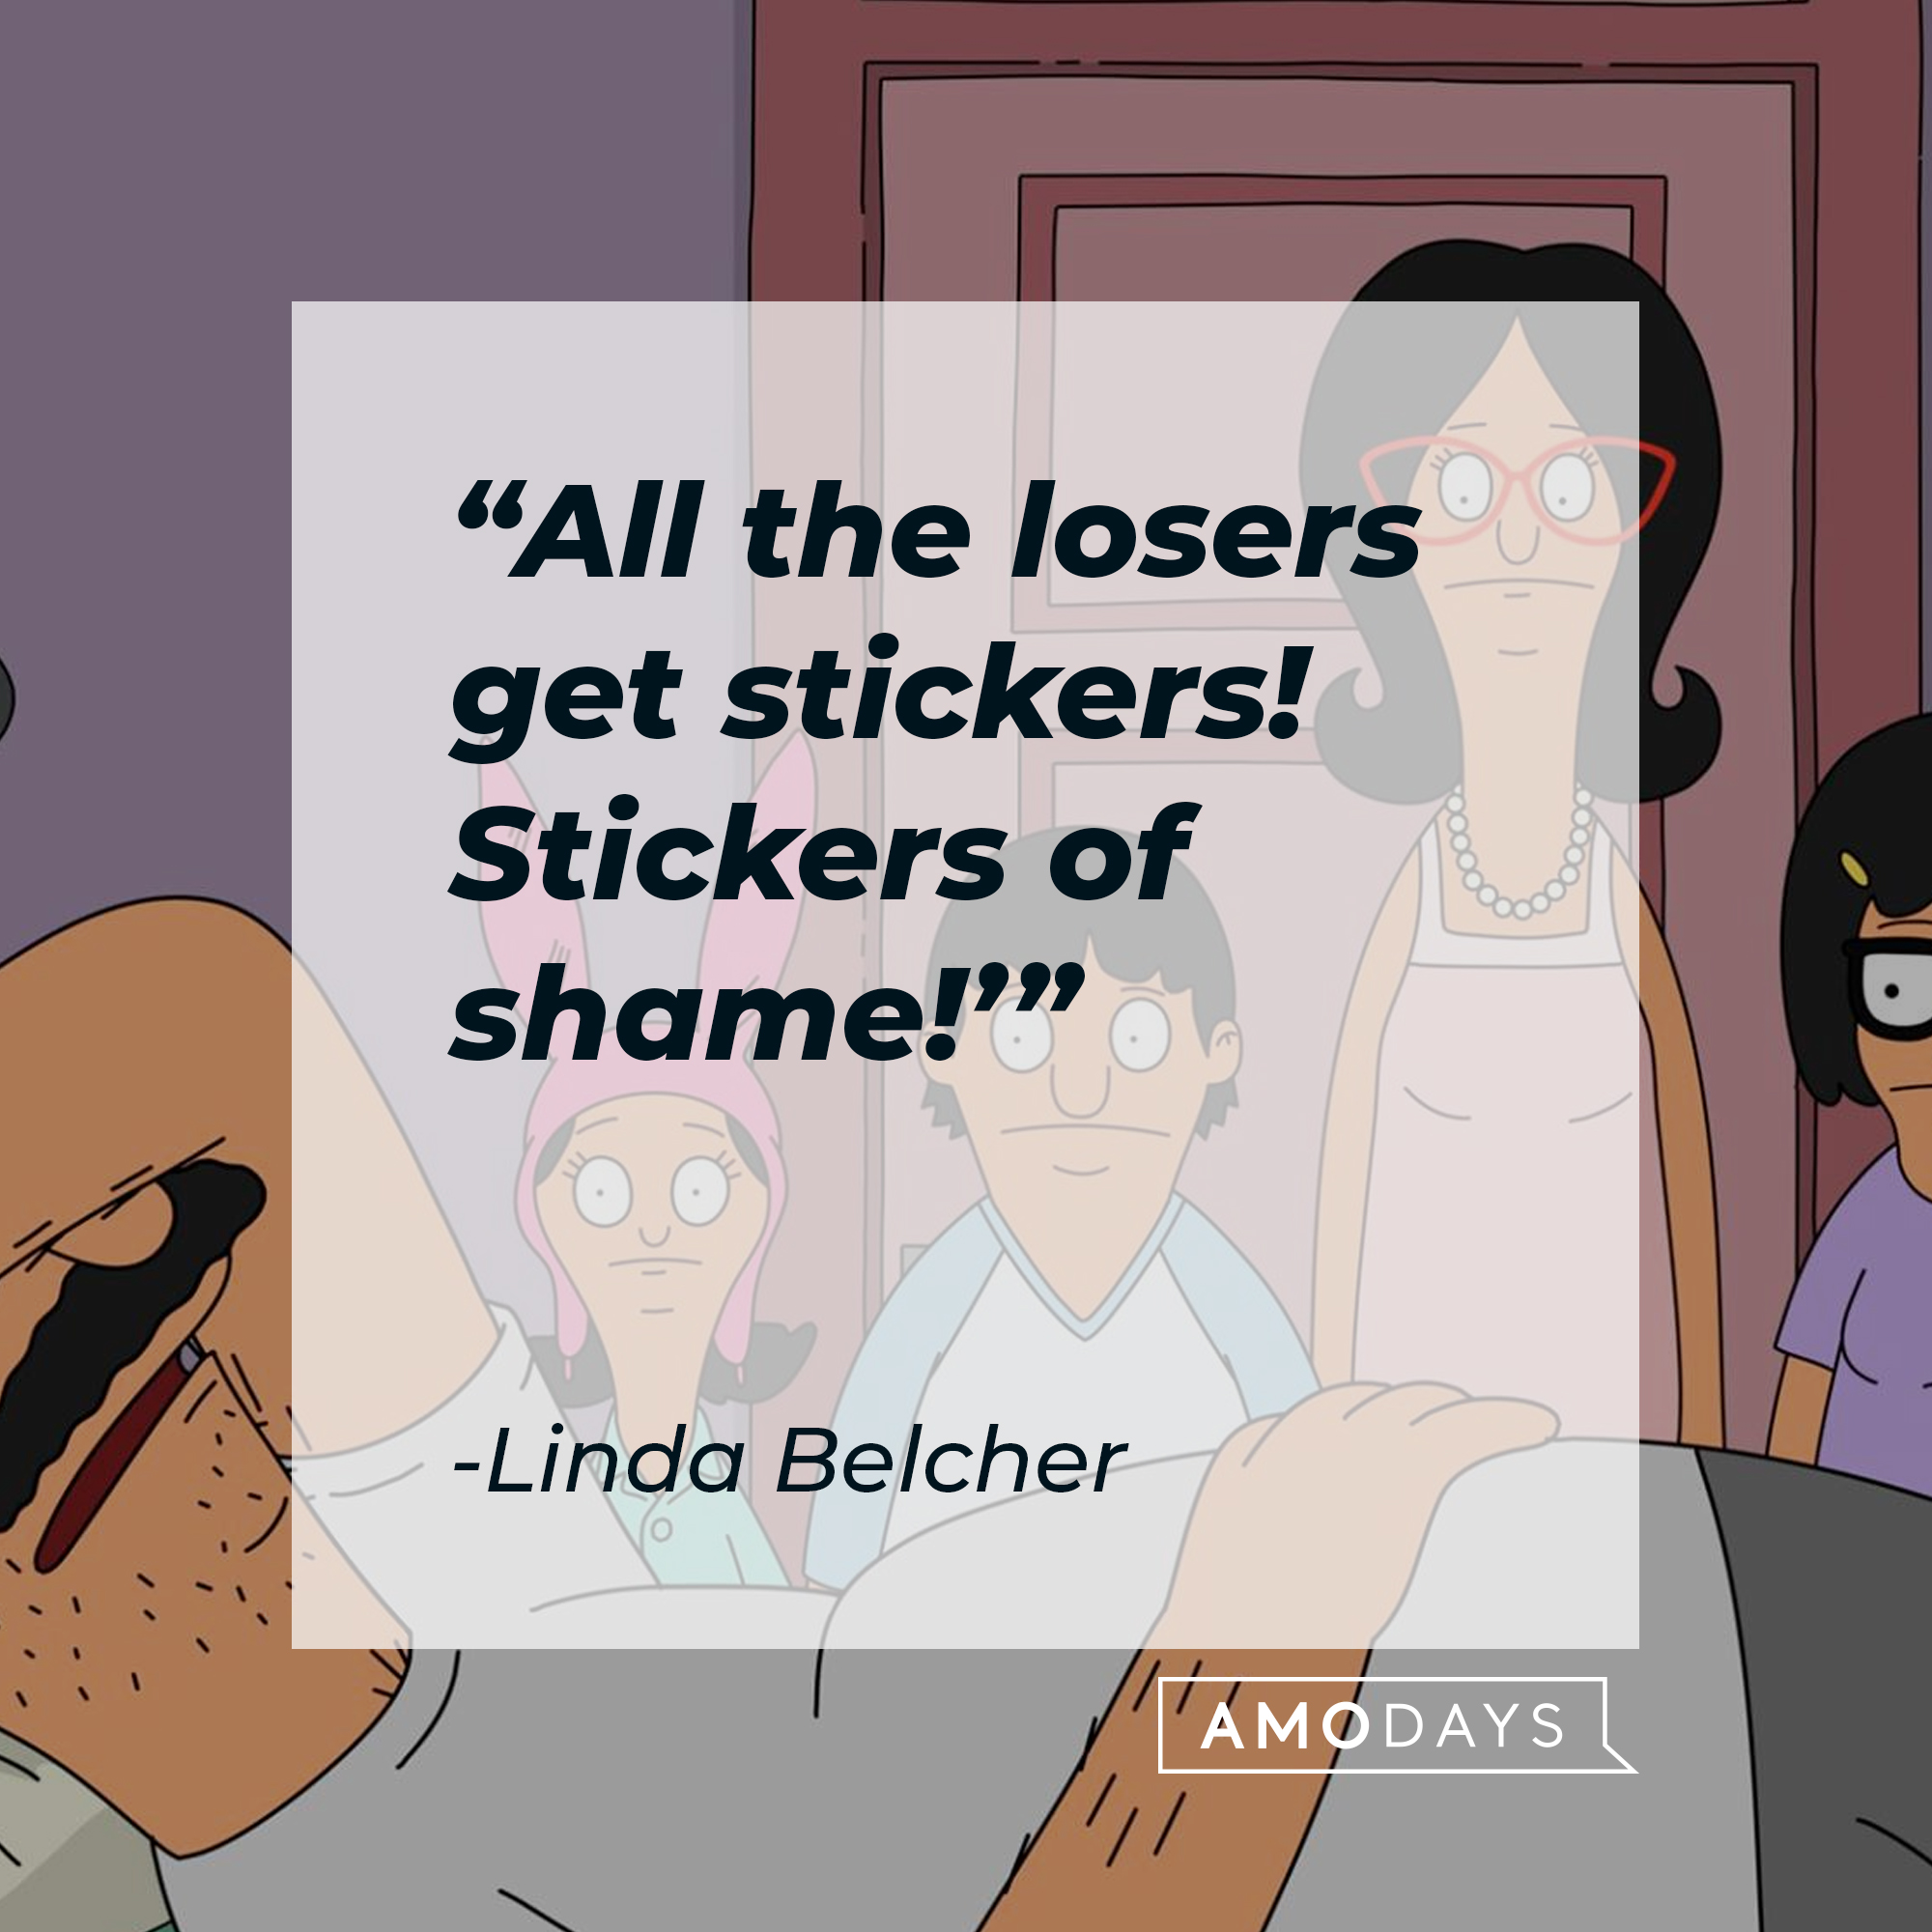 Characters from “Bob’s Burger’s,” including Linda Belcher, with her quote: “All the losers get stickers! Stickers of shame!” | Source: Facebook.com/BobsBurgers